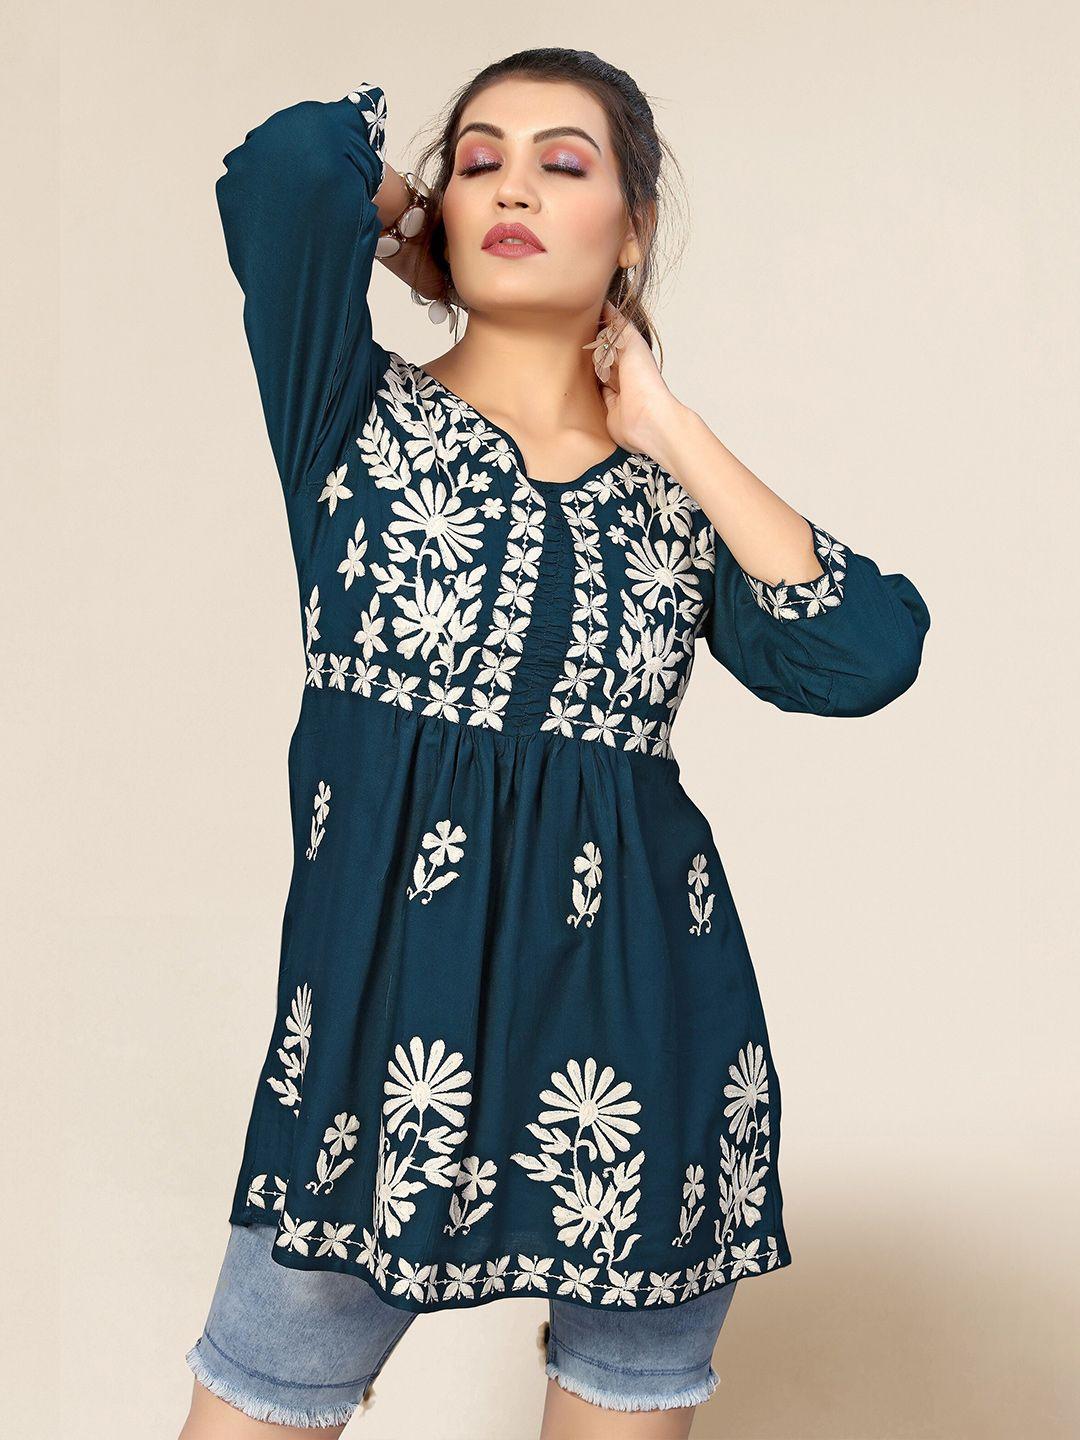 winza-designer-women-blue-floral-embroidered-top